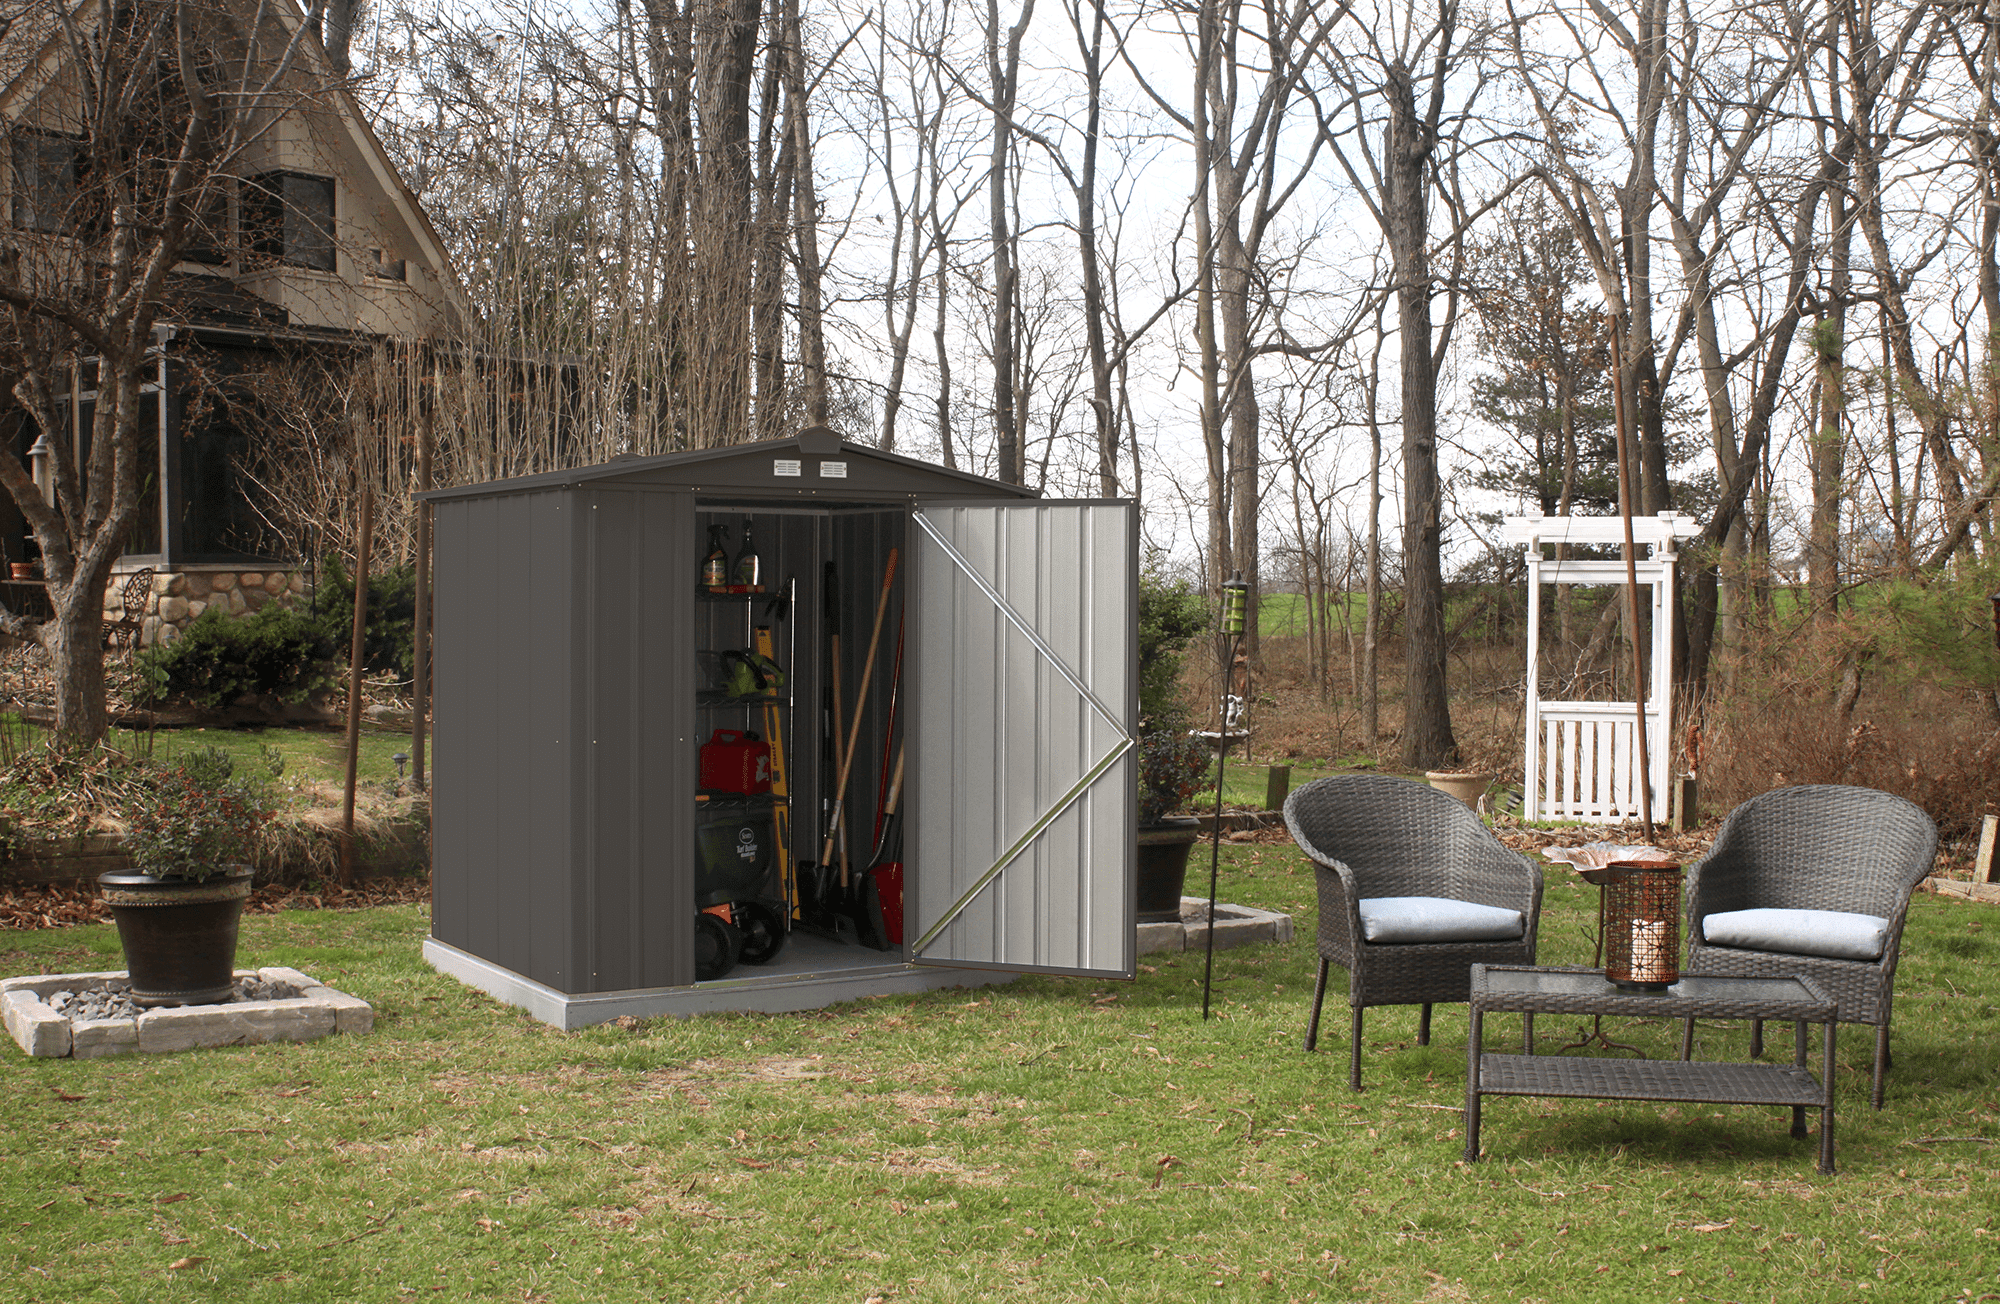 How To Level The Ground For A Storage Shed